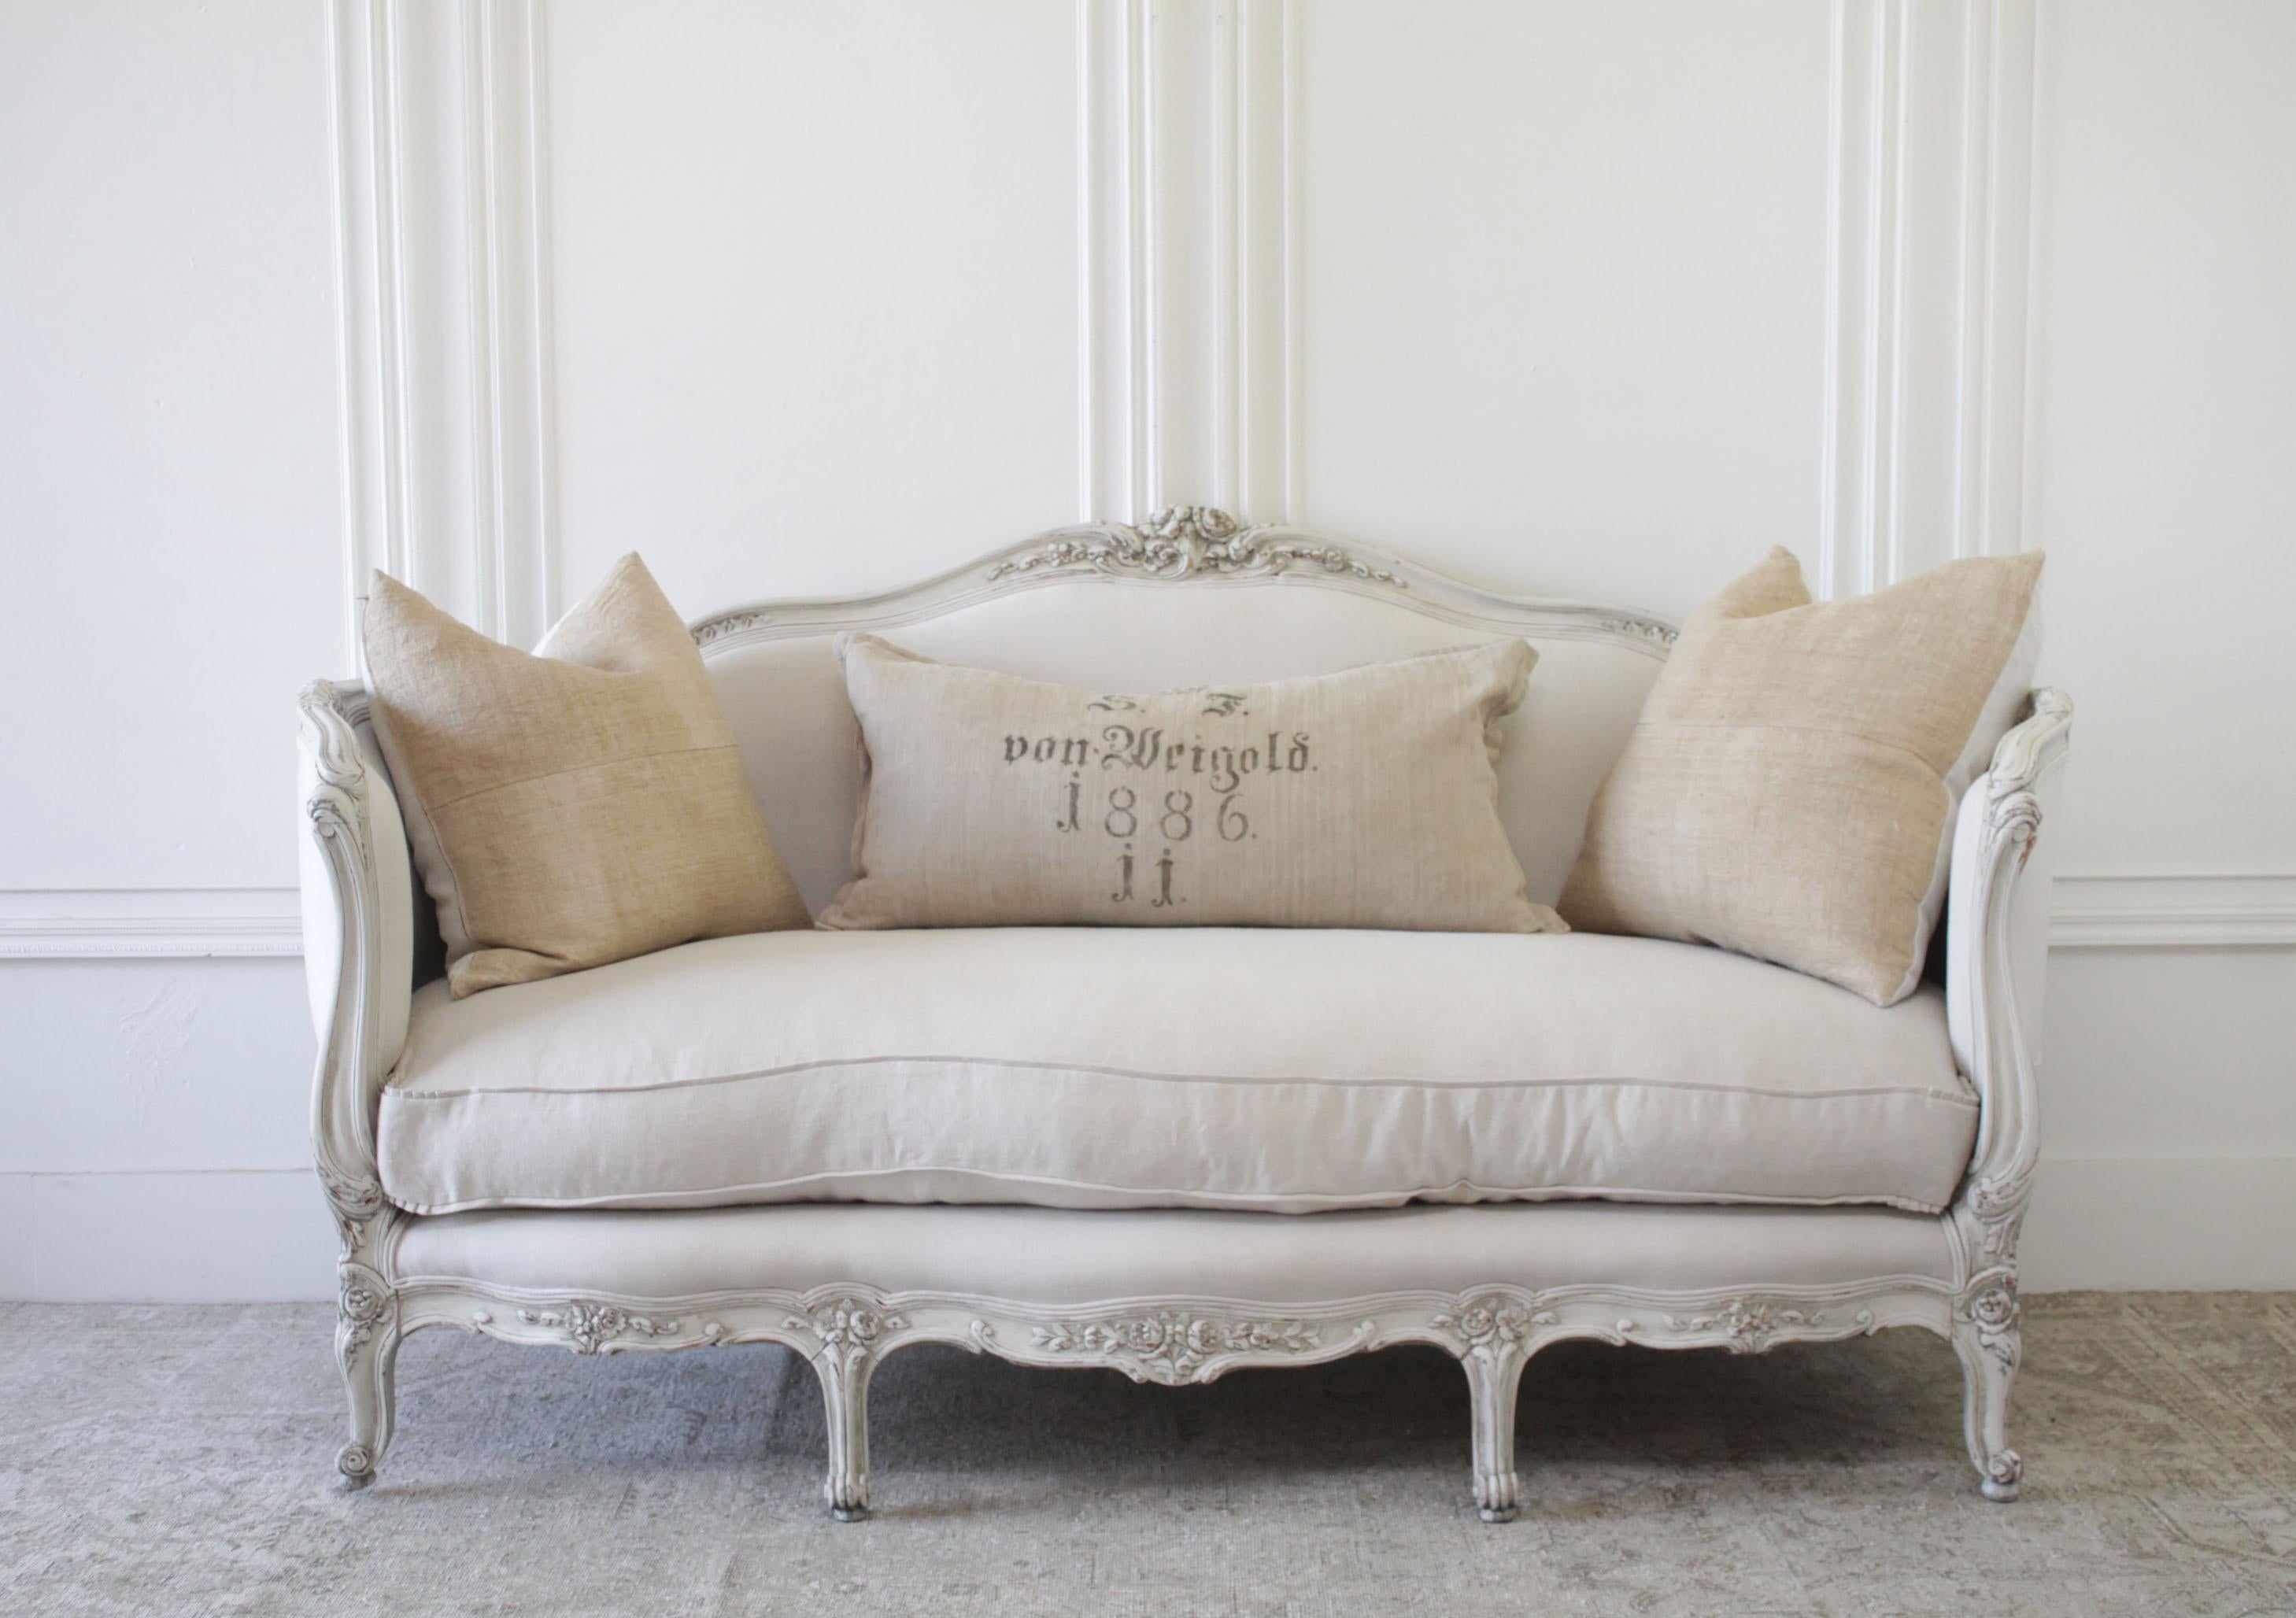 European Antique Louis XV Style Painted and Upholstered French Sofa in Belgian Linen